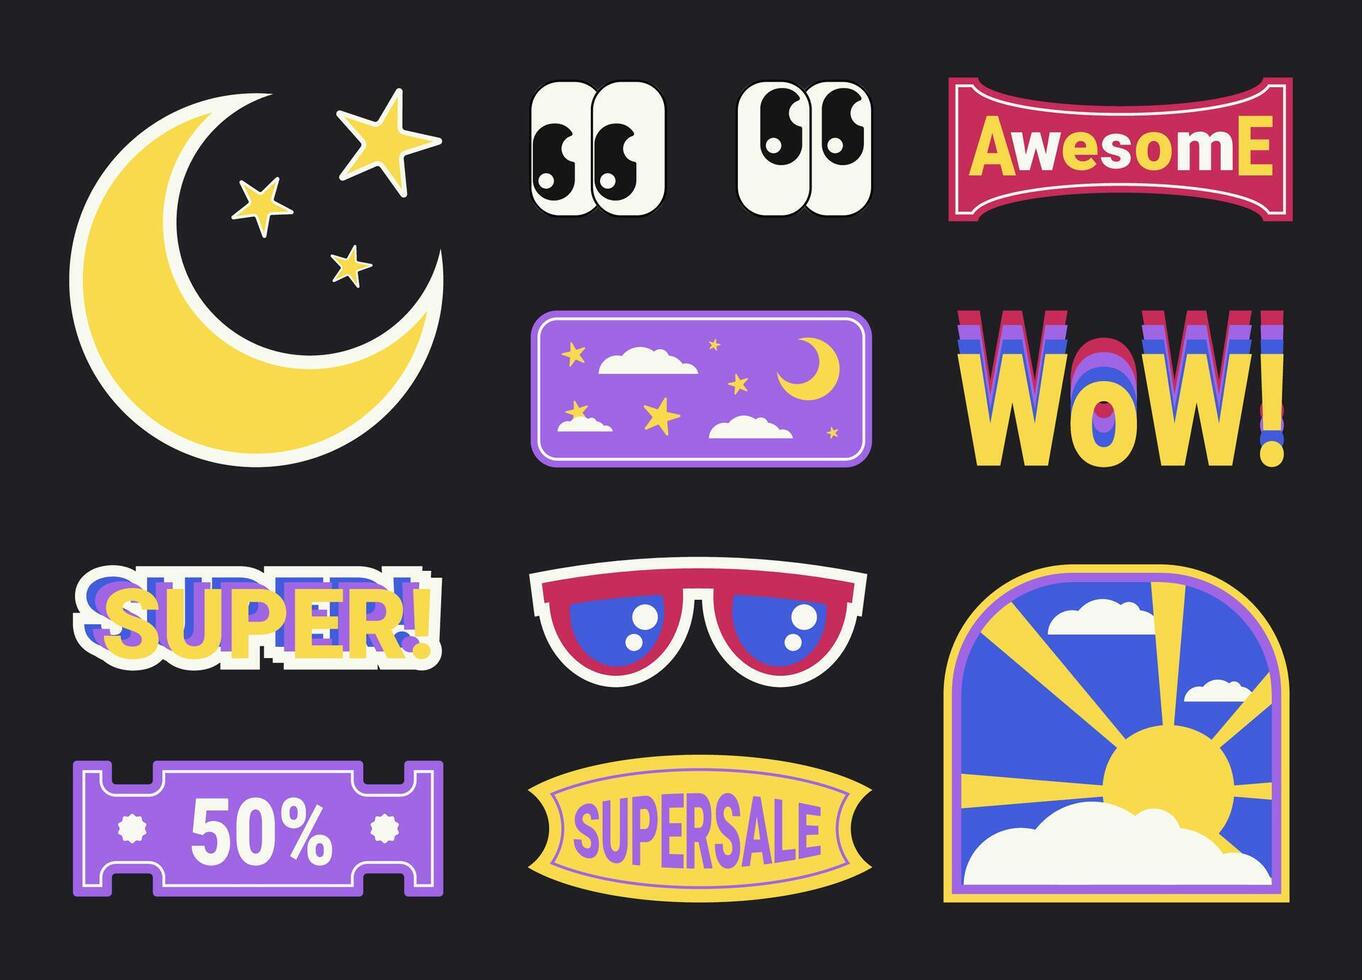 Y2K sticker set, old fashioned labels and badges in retro graphic style, design elements and decorations. Vector illustration.